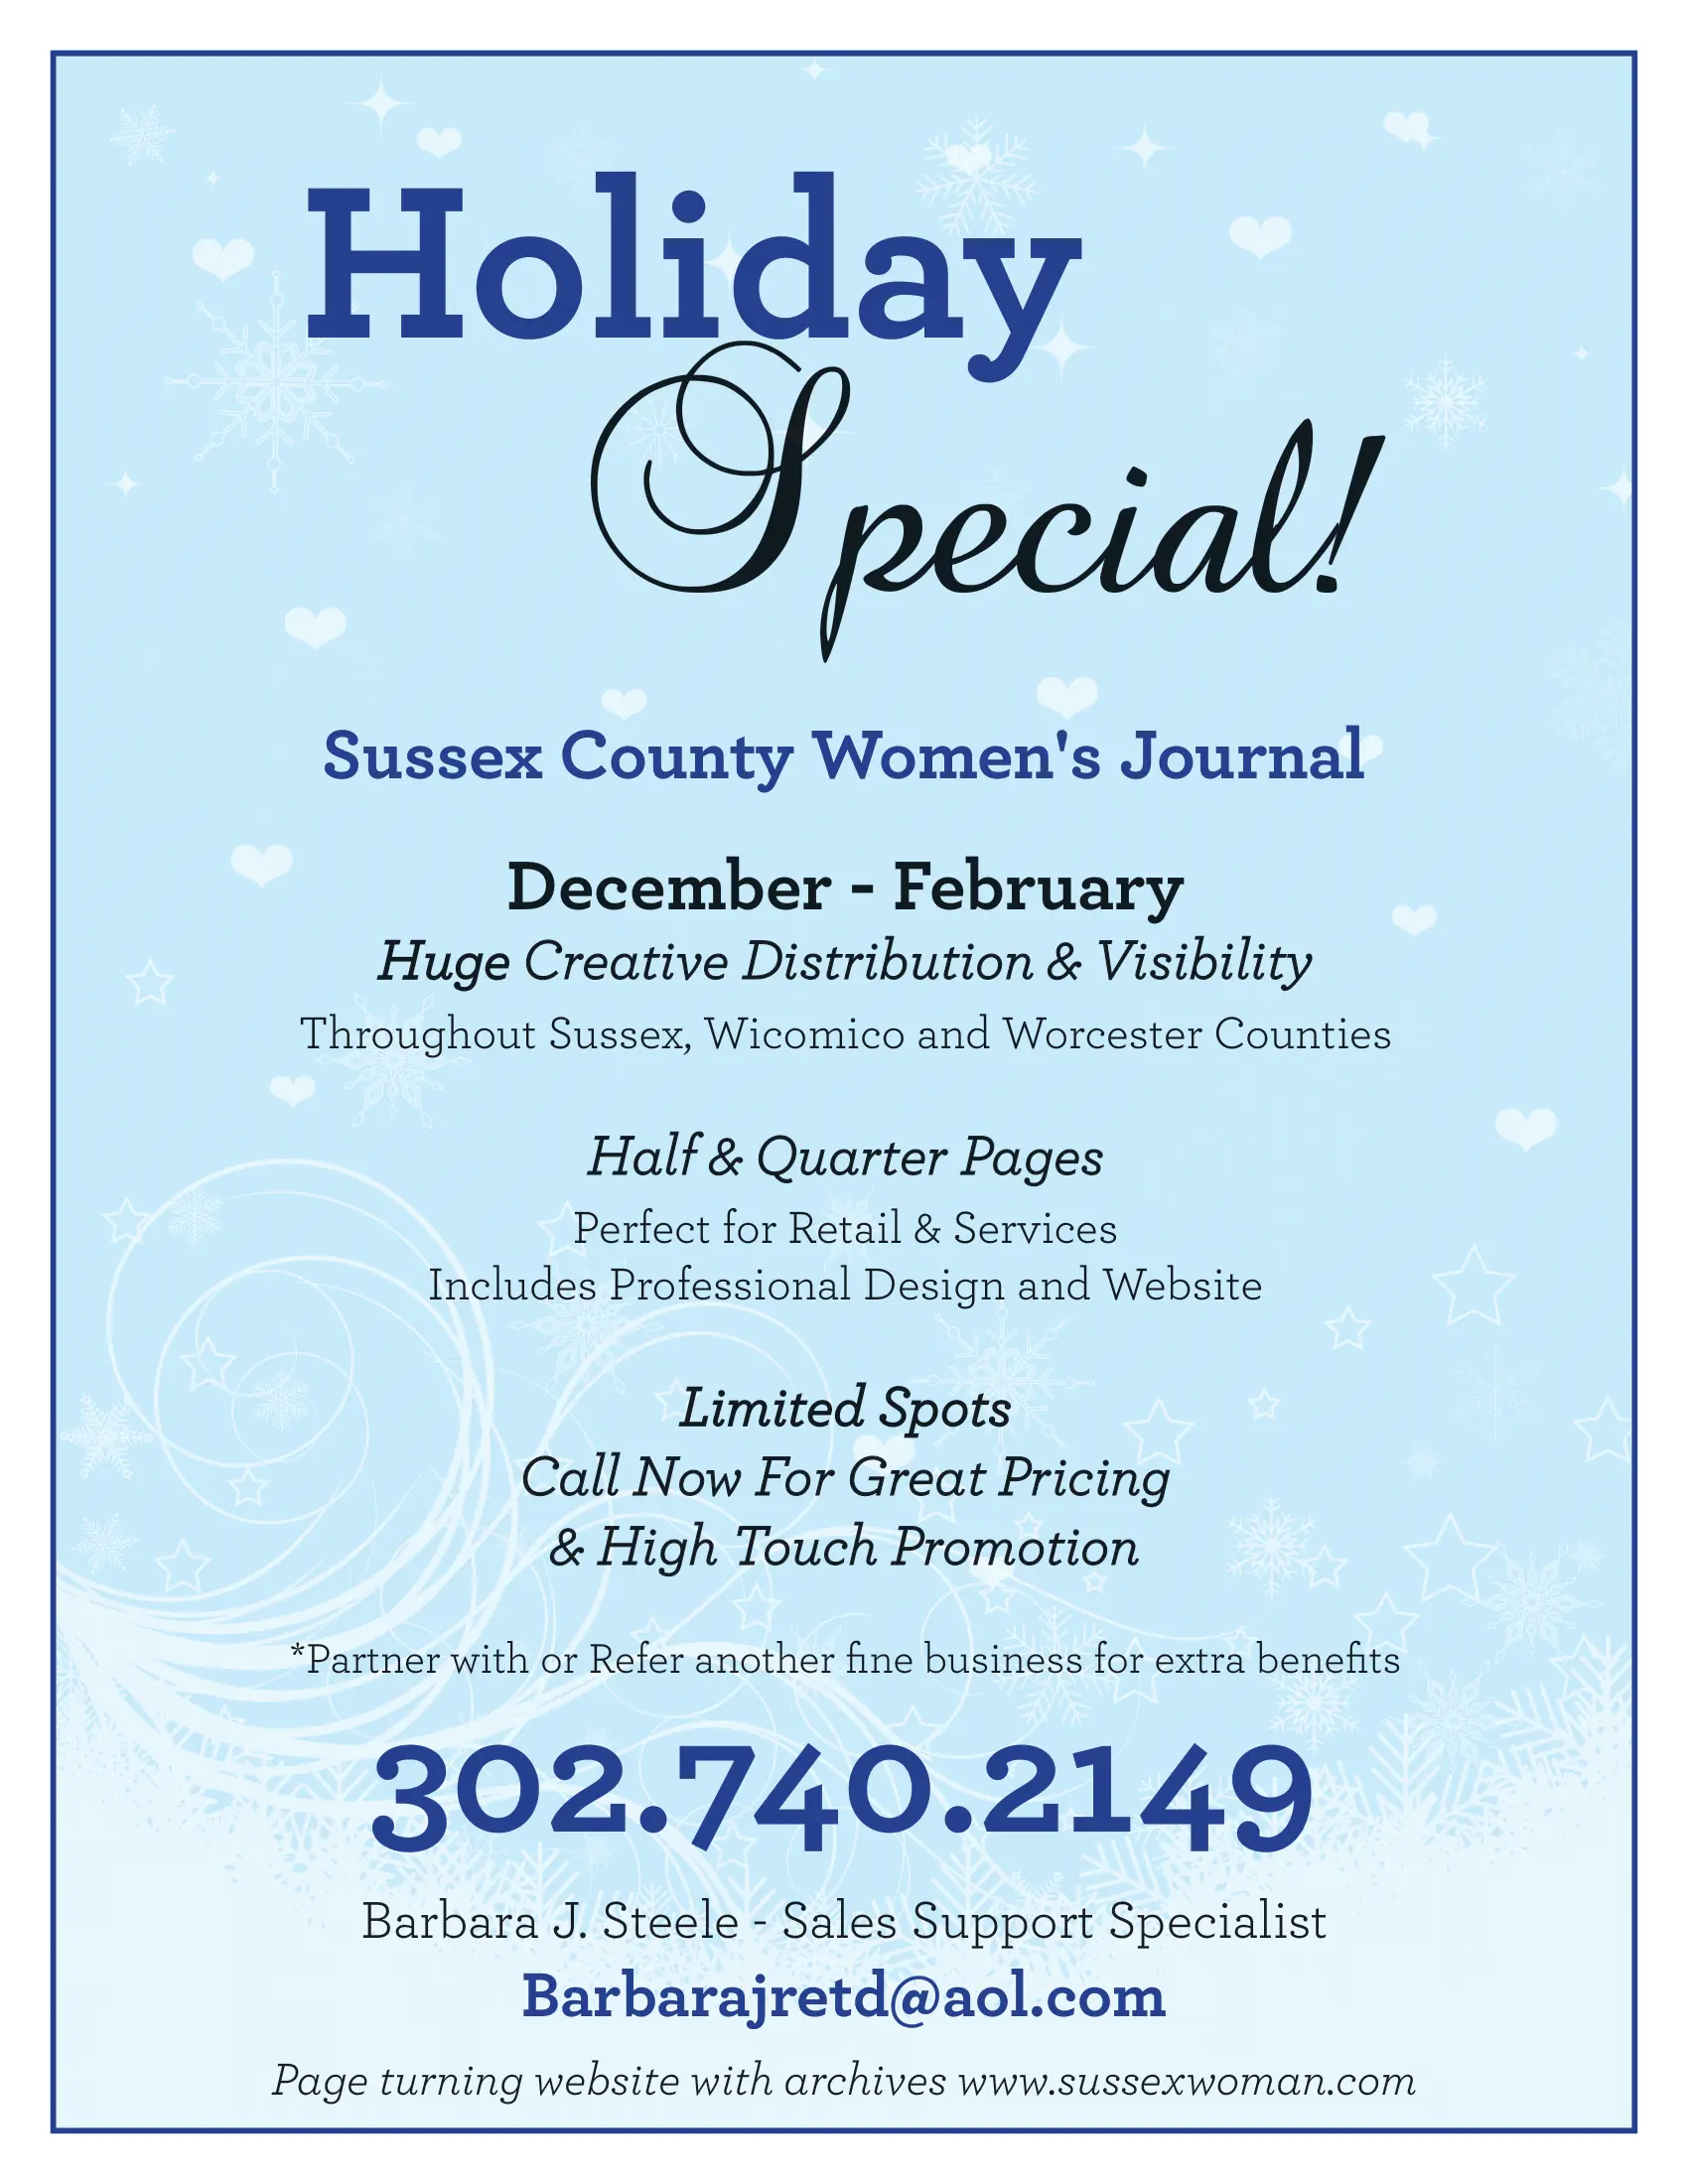 Holiday Special Flyer